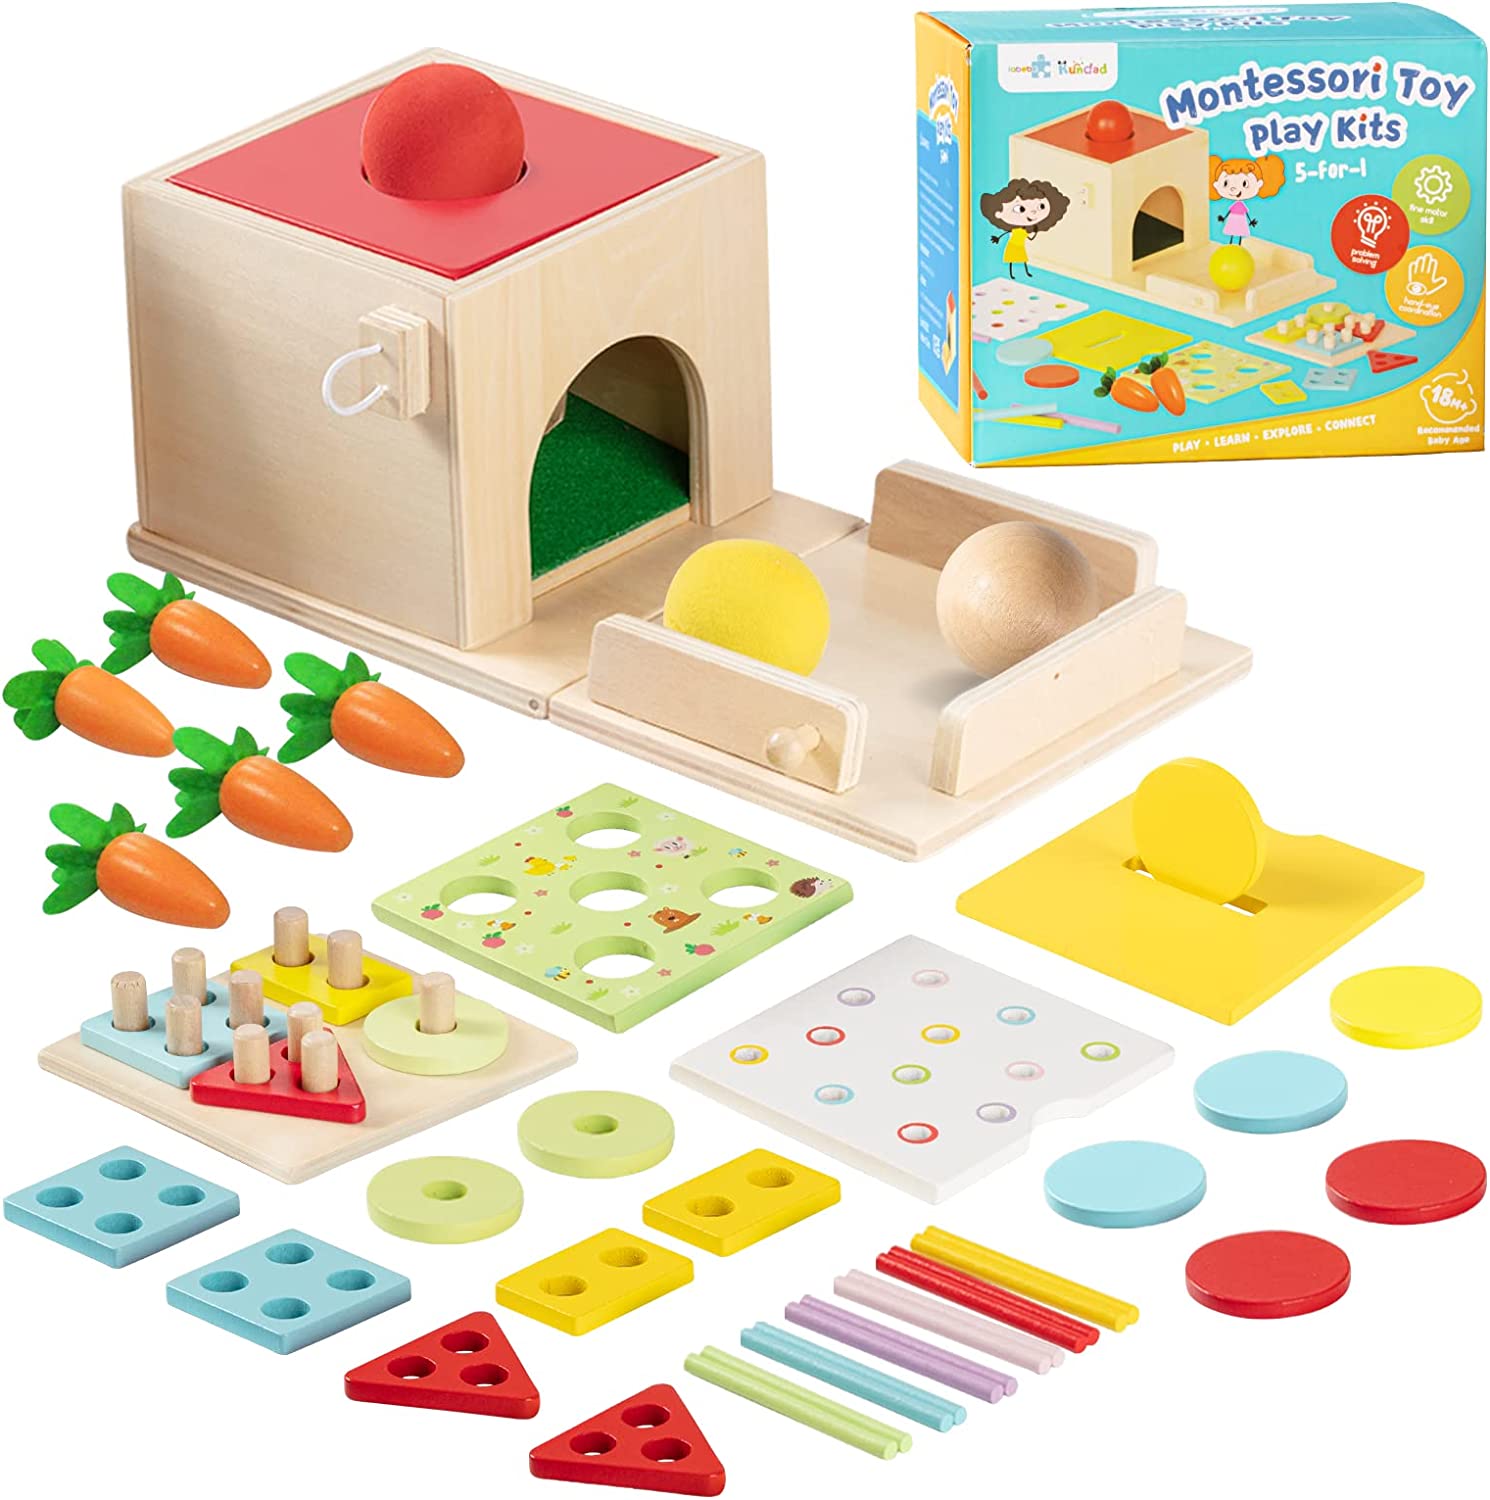 Play Kitchen Accessories, Frogprin Wooden Toy Mixer Set, Pretend Play